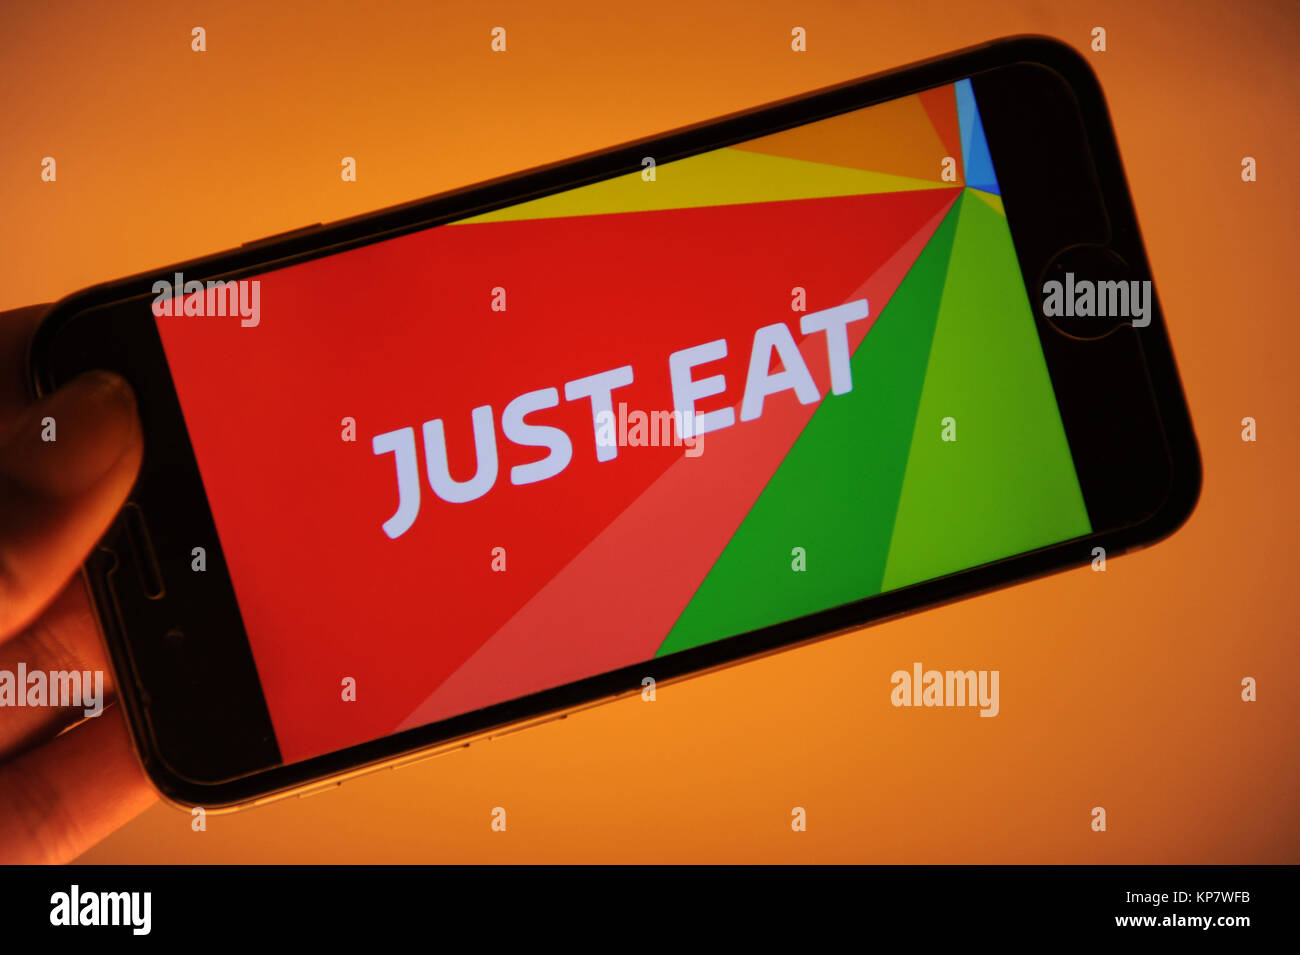 The Just East online food ordering company logo on a phone Stock Photo